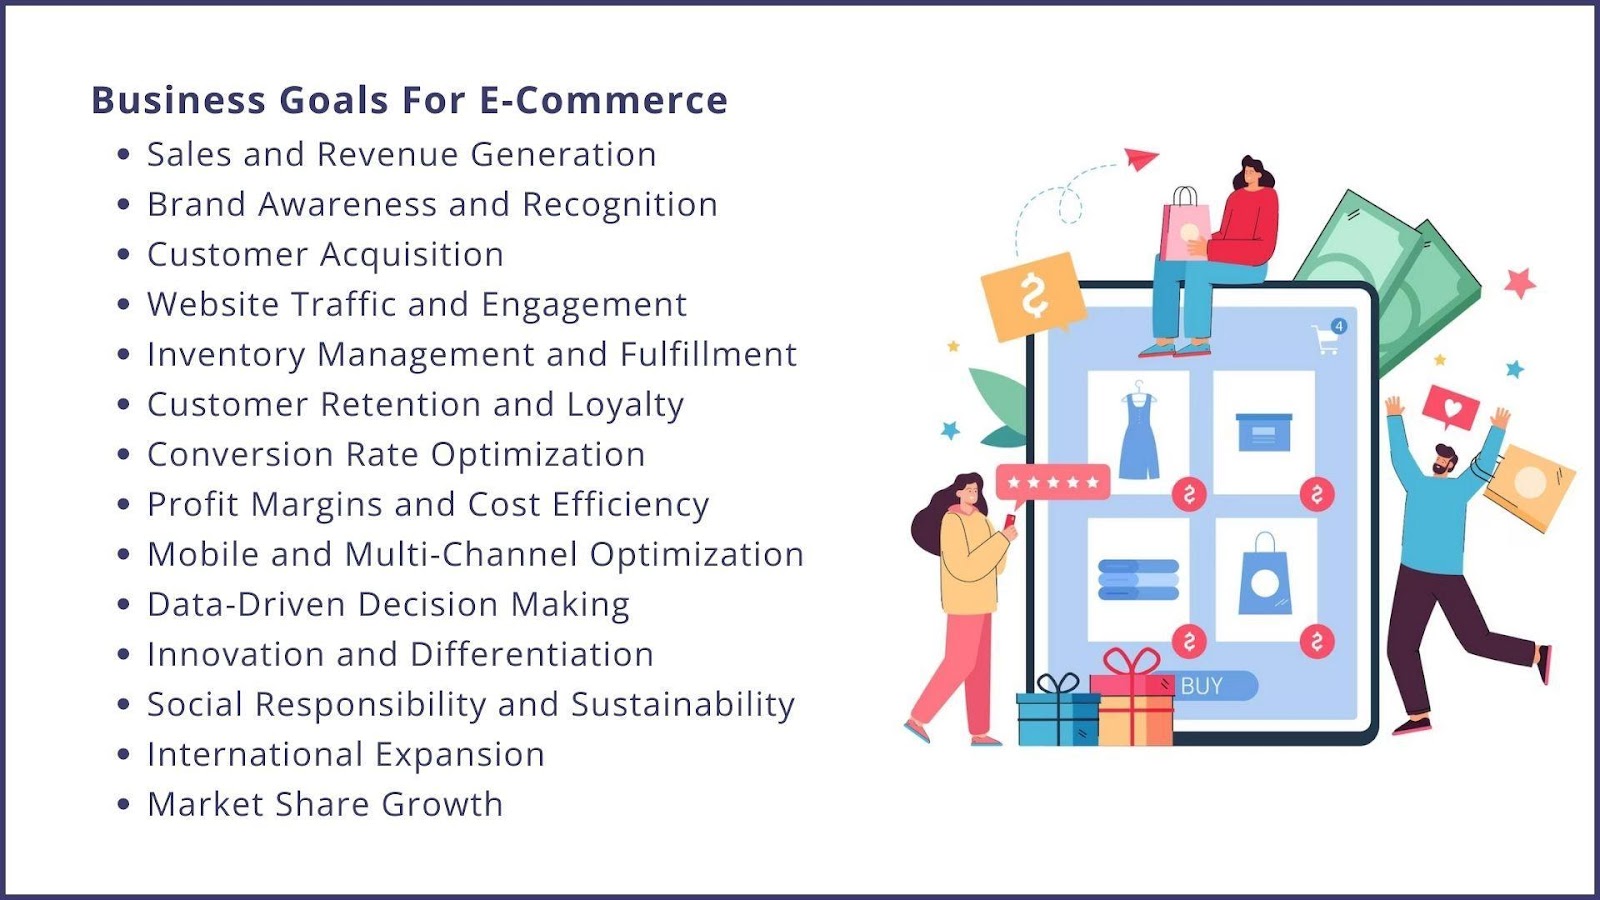 Your e-commerce goals can differ according to your resources and capabilities. 